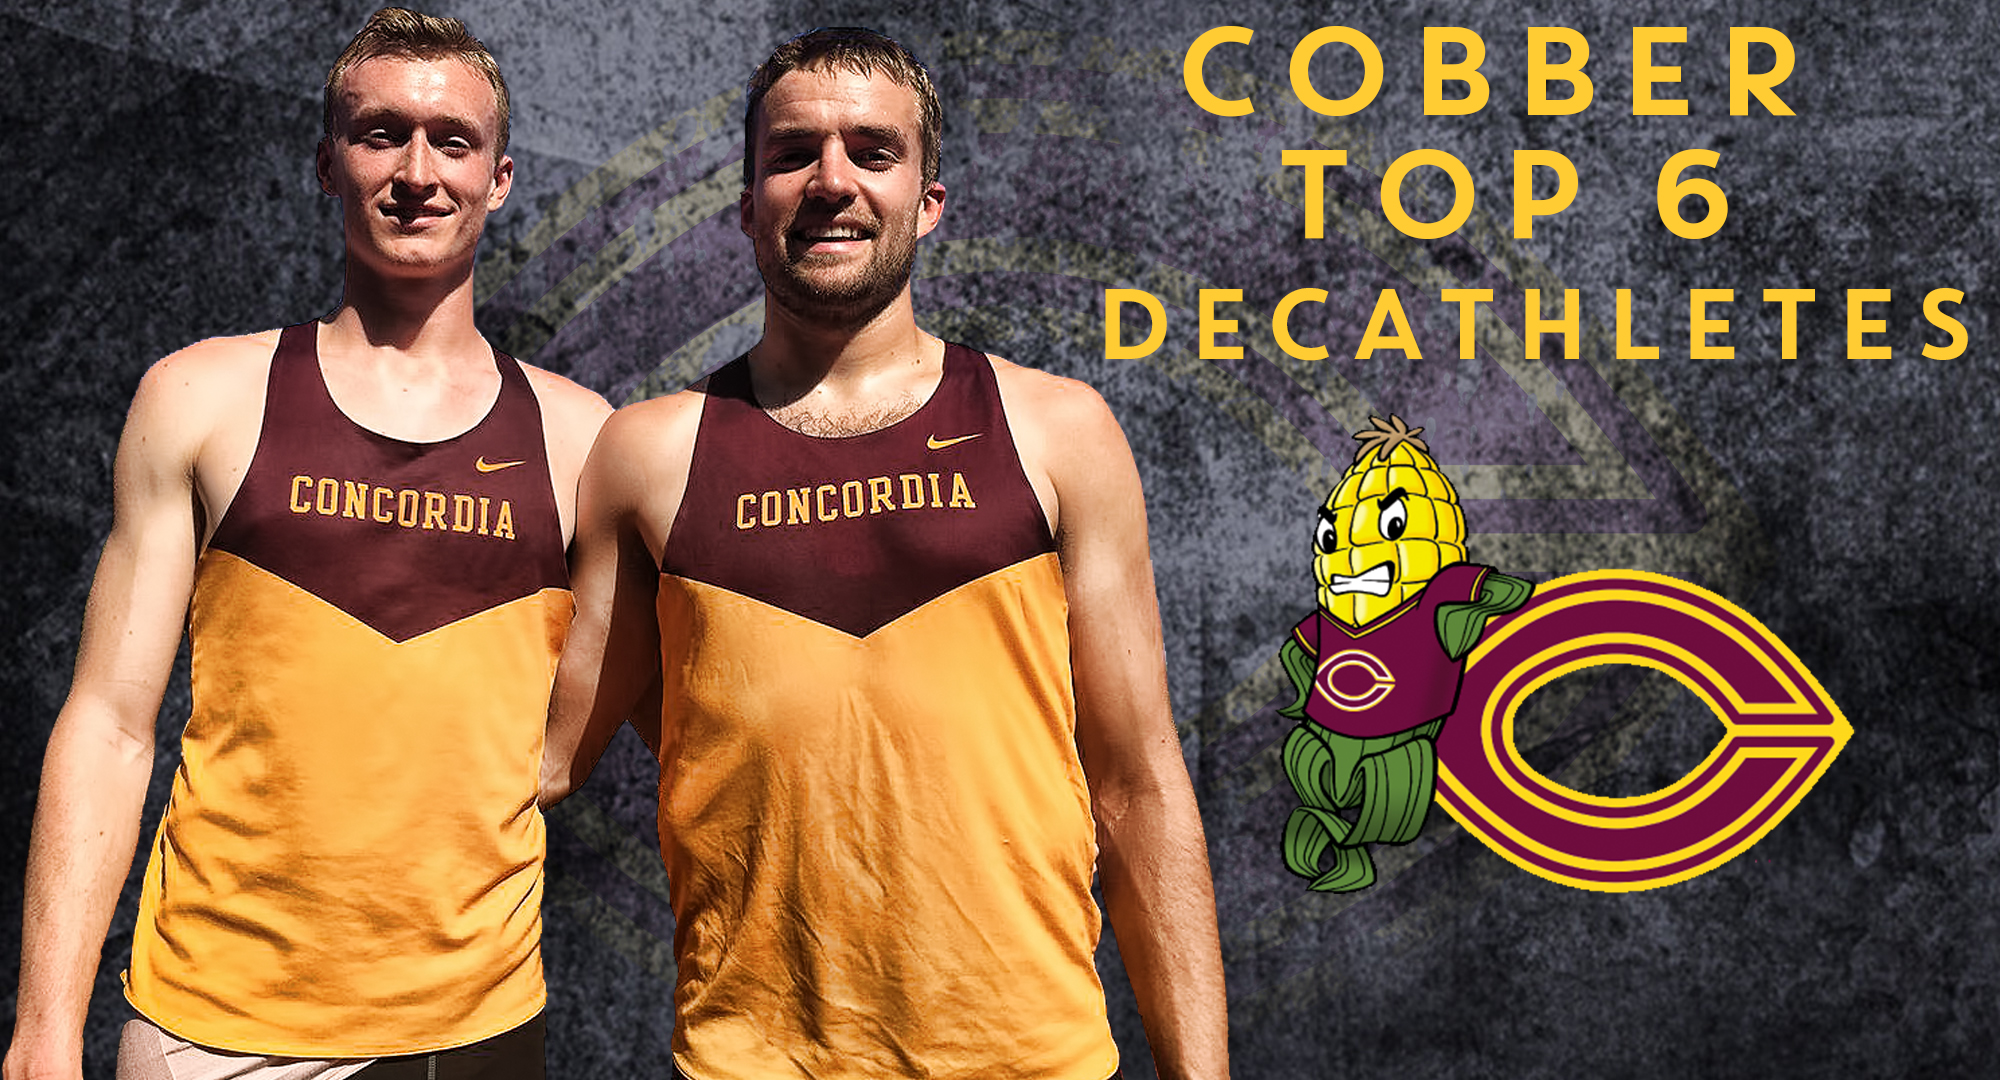 Jackson Schepp (L) and Joe Hendrickson both posted all-time Top 6 scores in the decathlon at the North Central Invite.